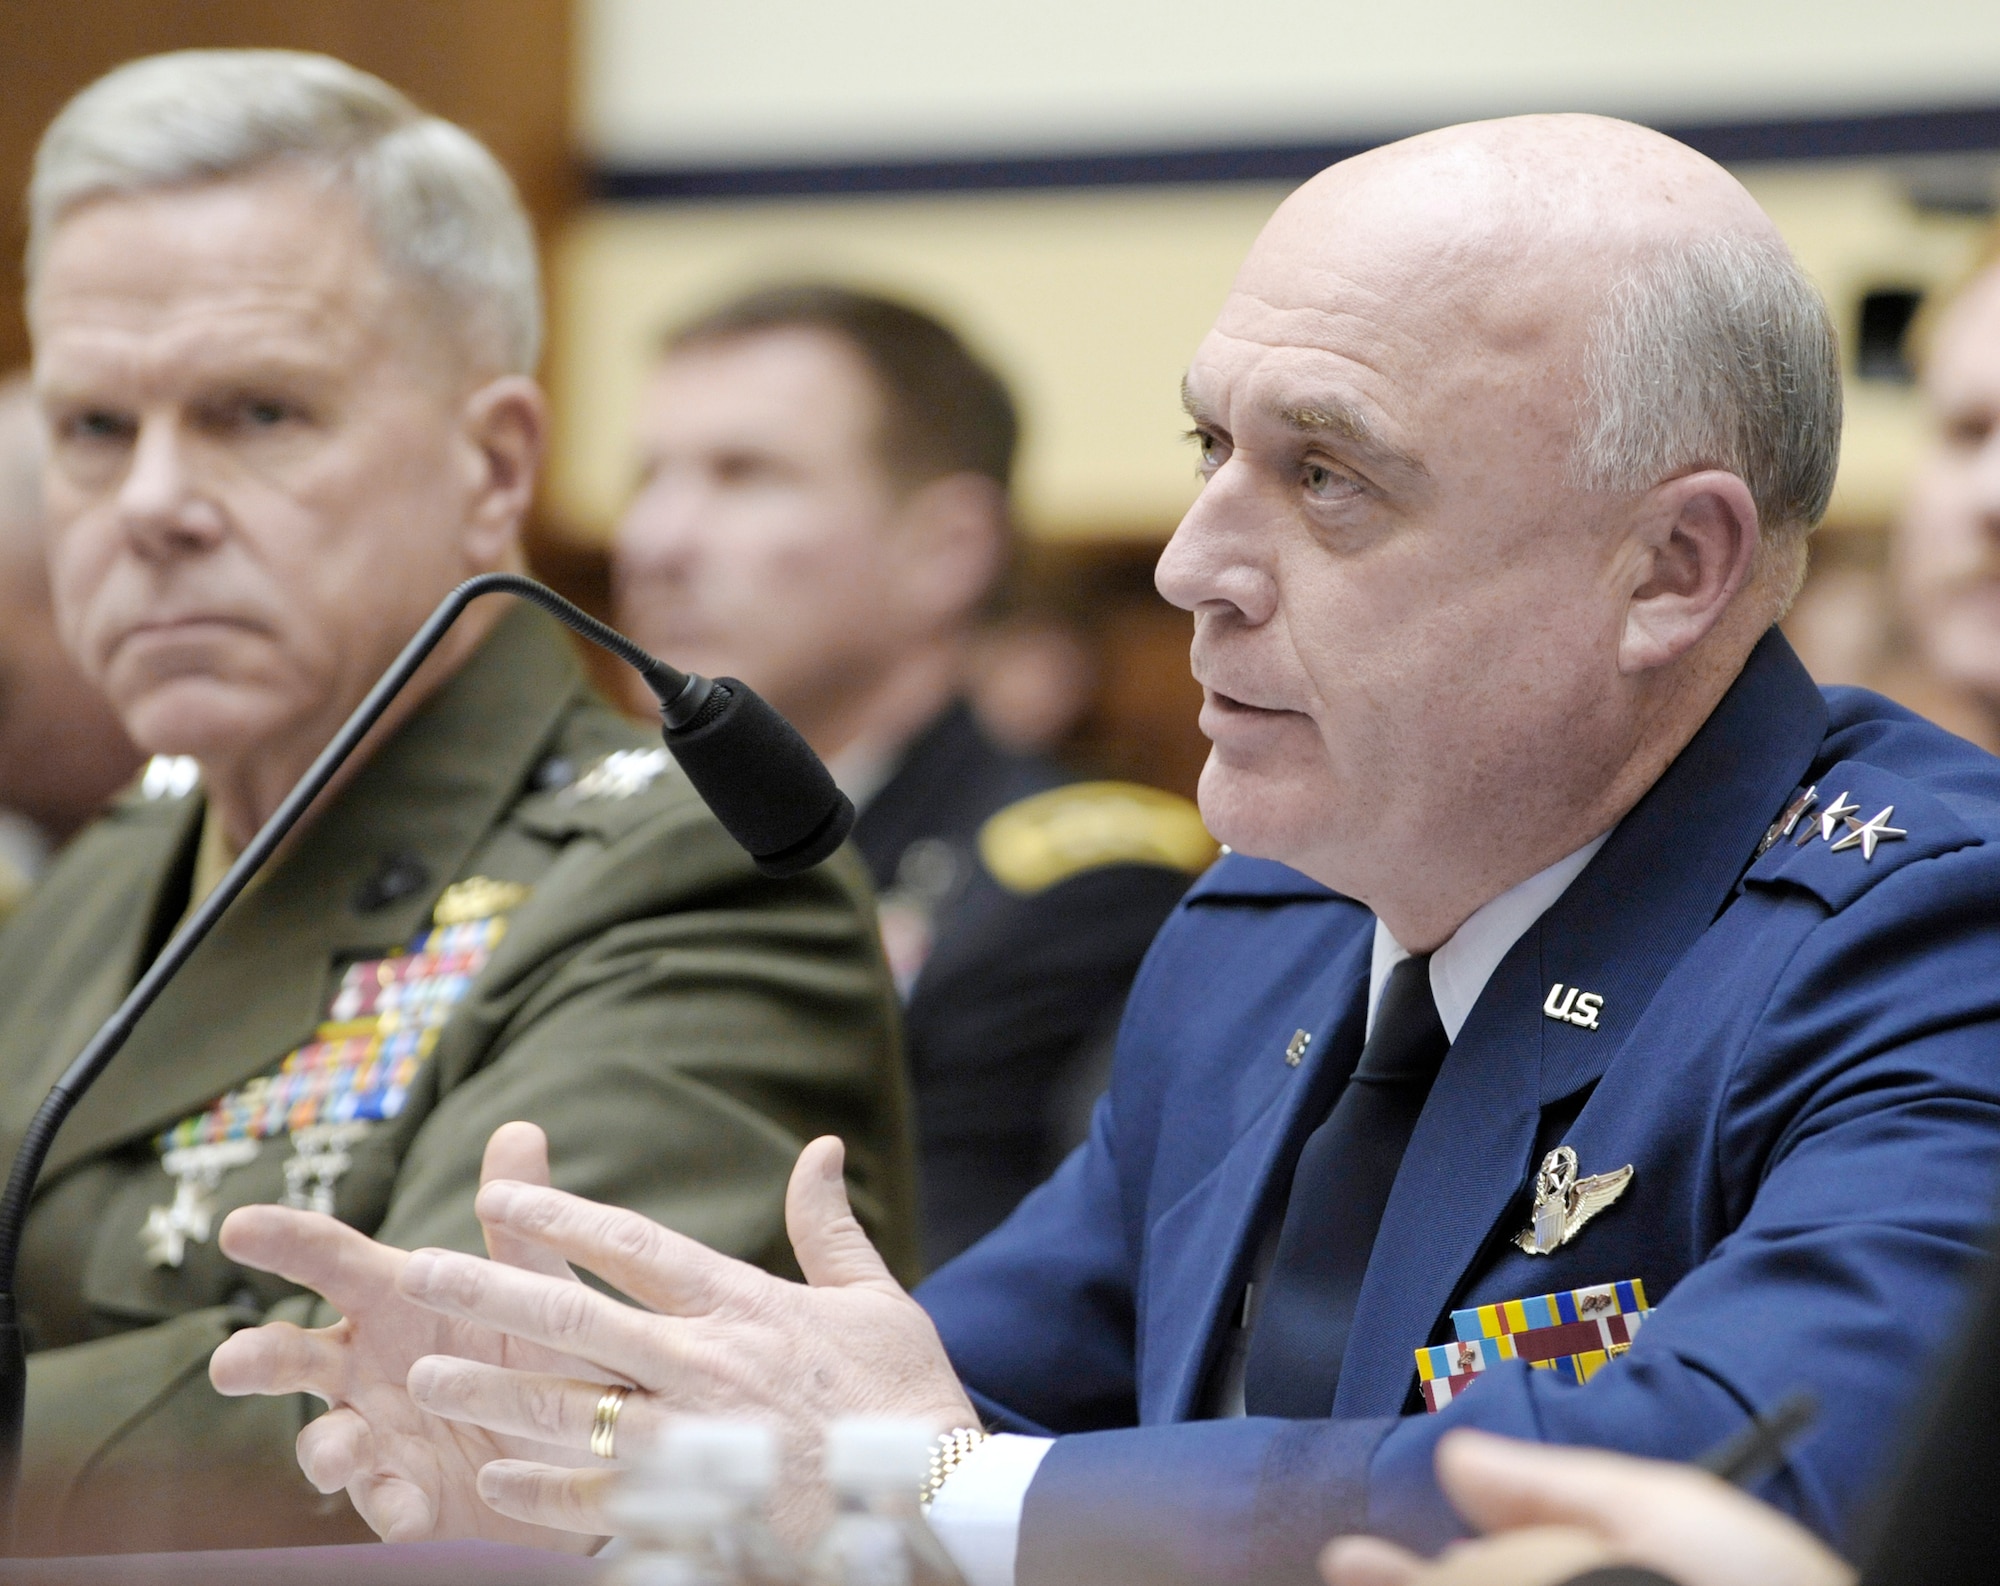 Air Force Vice Chief of Staff Gen. Carrol H. "Howie" Chandler testifies before the House Armed Services Subcommittee on Readiness March 16, 2010, along with the vice chiefs of staff for the other military services. General Chandler provided information and addressed questions pertaining to Air Force readiness, including details on weapon system sustainment, preserving the ICBM defense industrial base, and the importance of cyber security.  (U.S. Air Force photo/Jim Varhegyi)